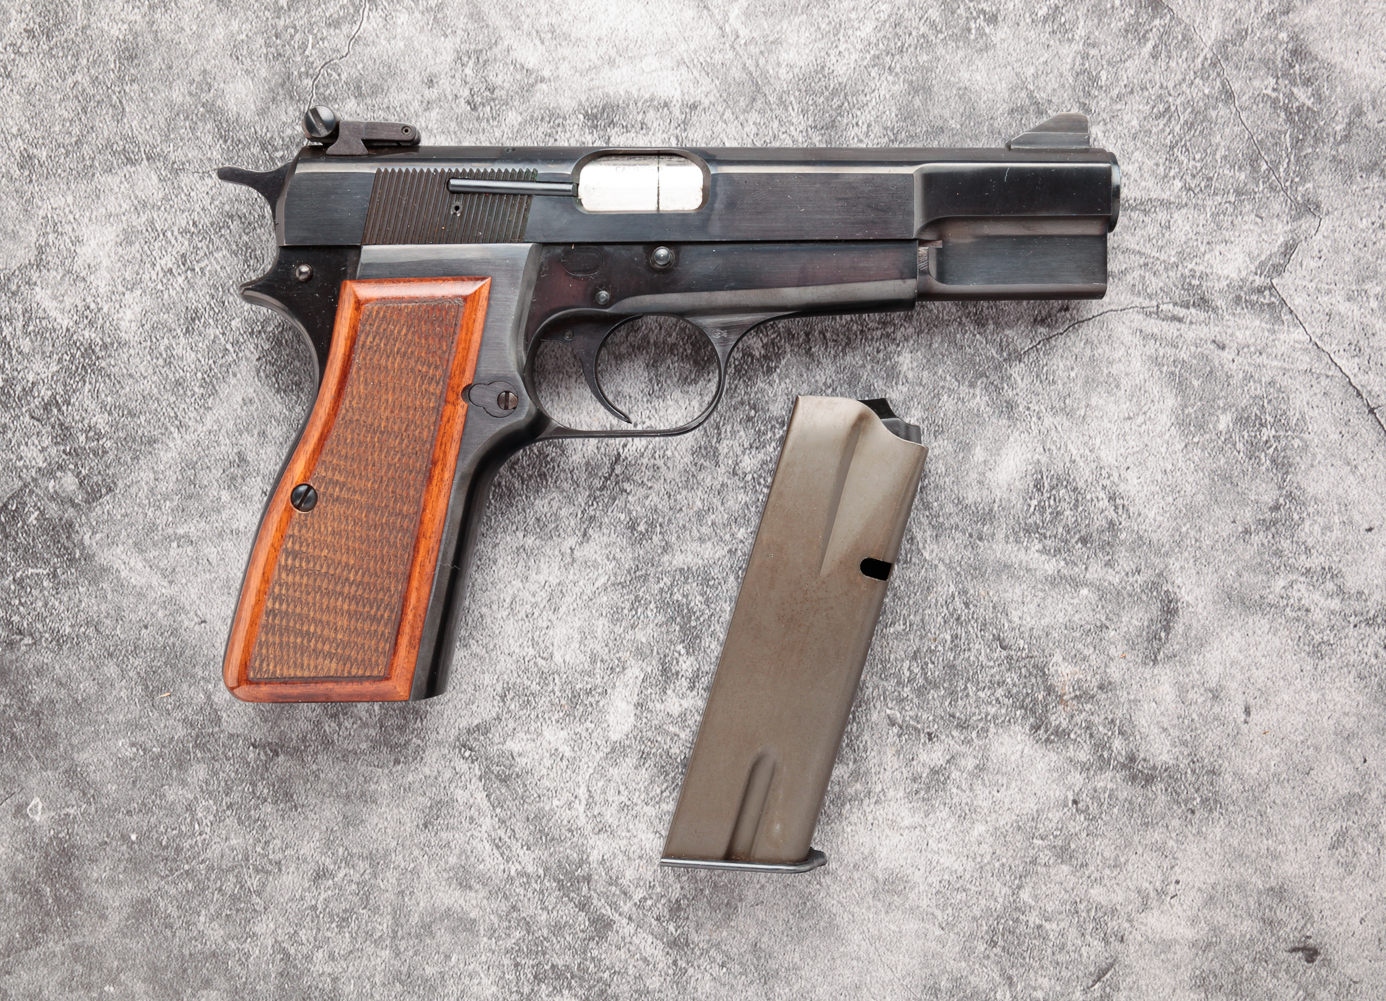 BROWNING HI POWER 9MM SEMI AUTOMATIC 31a878